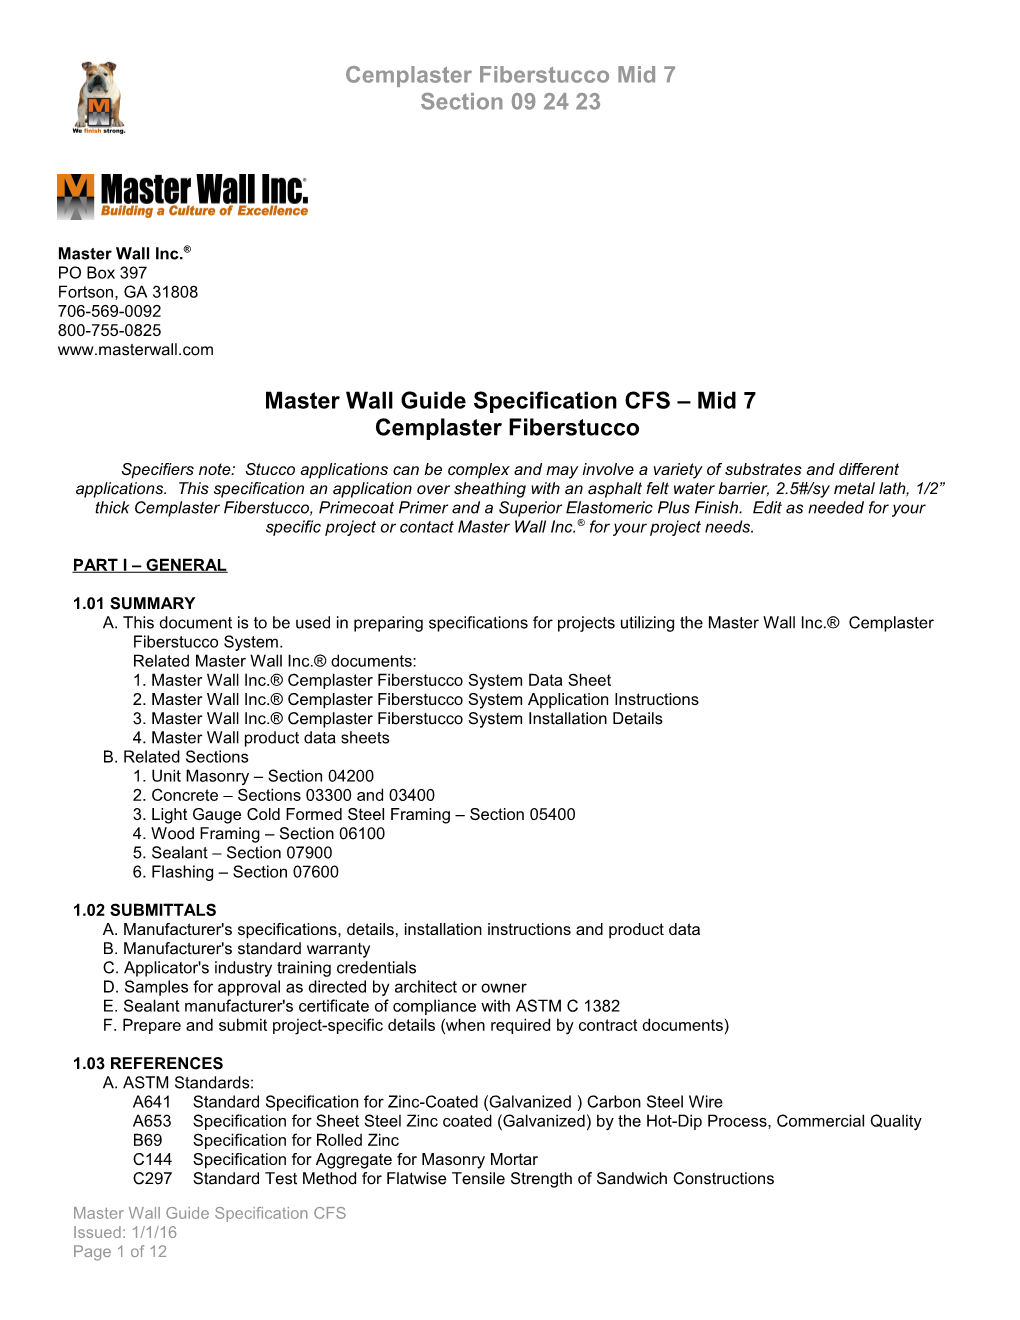 Master Wall Guide Specification CFS Mid 7